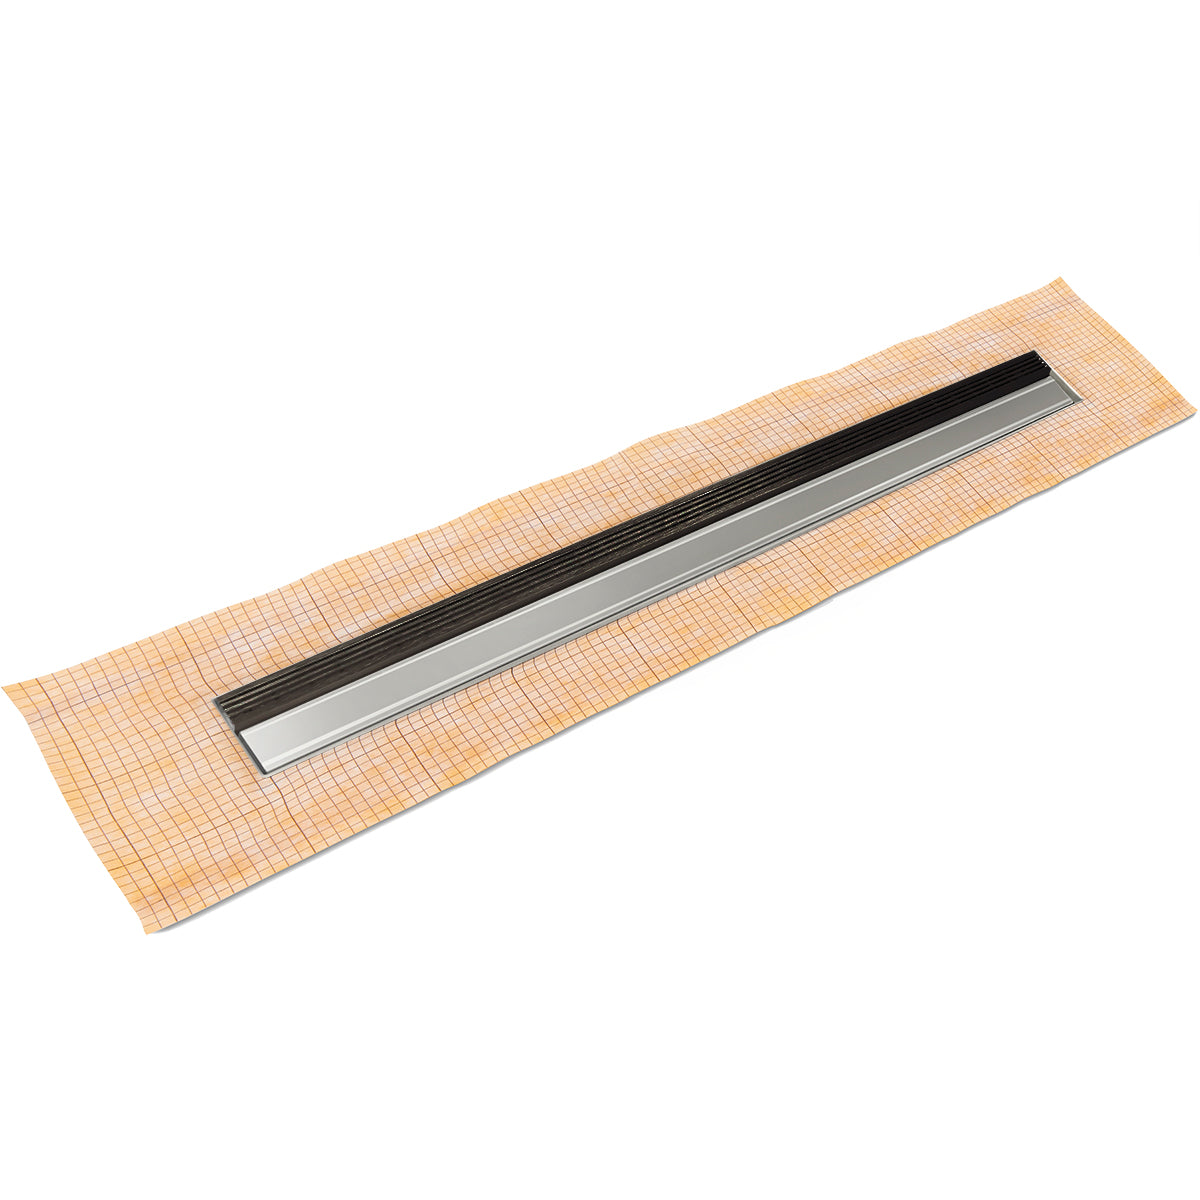 Infinity Drain 36" FCS Series Schluter-Kerdi - Fixed Flange Linear Drain Kit with 1" Wedge Wire Grate